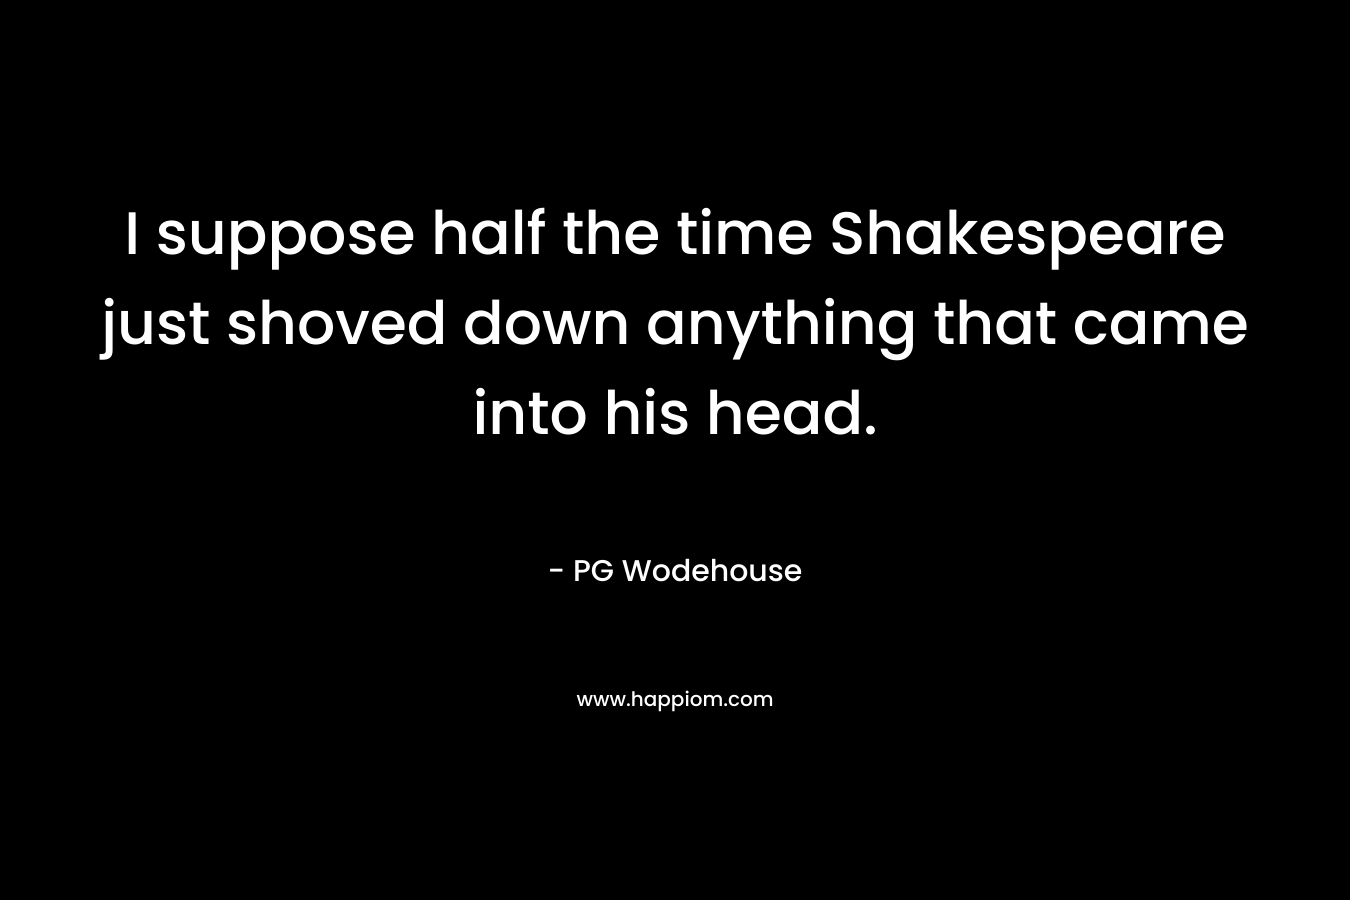 I suppose half the time Shakespeare just shoved down anything that came into his head. – PG Wodehouse